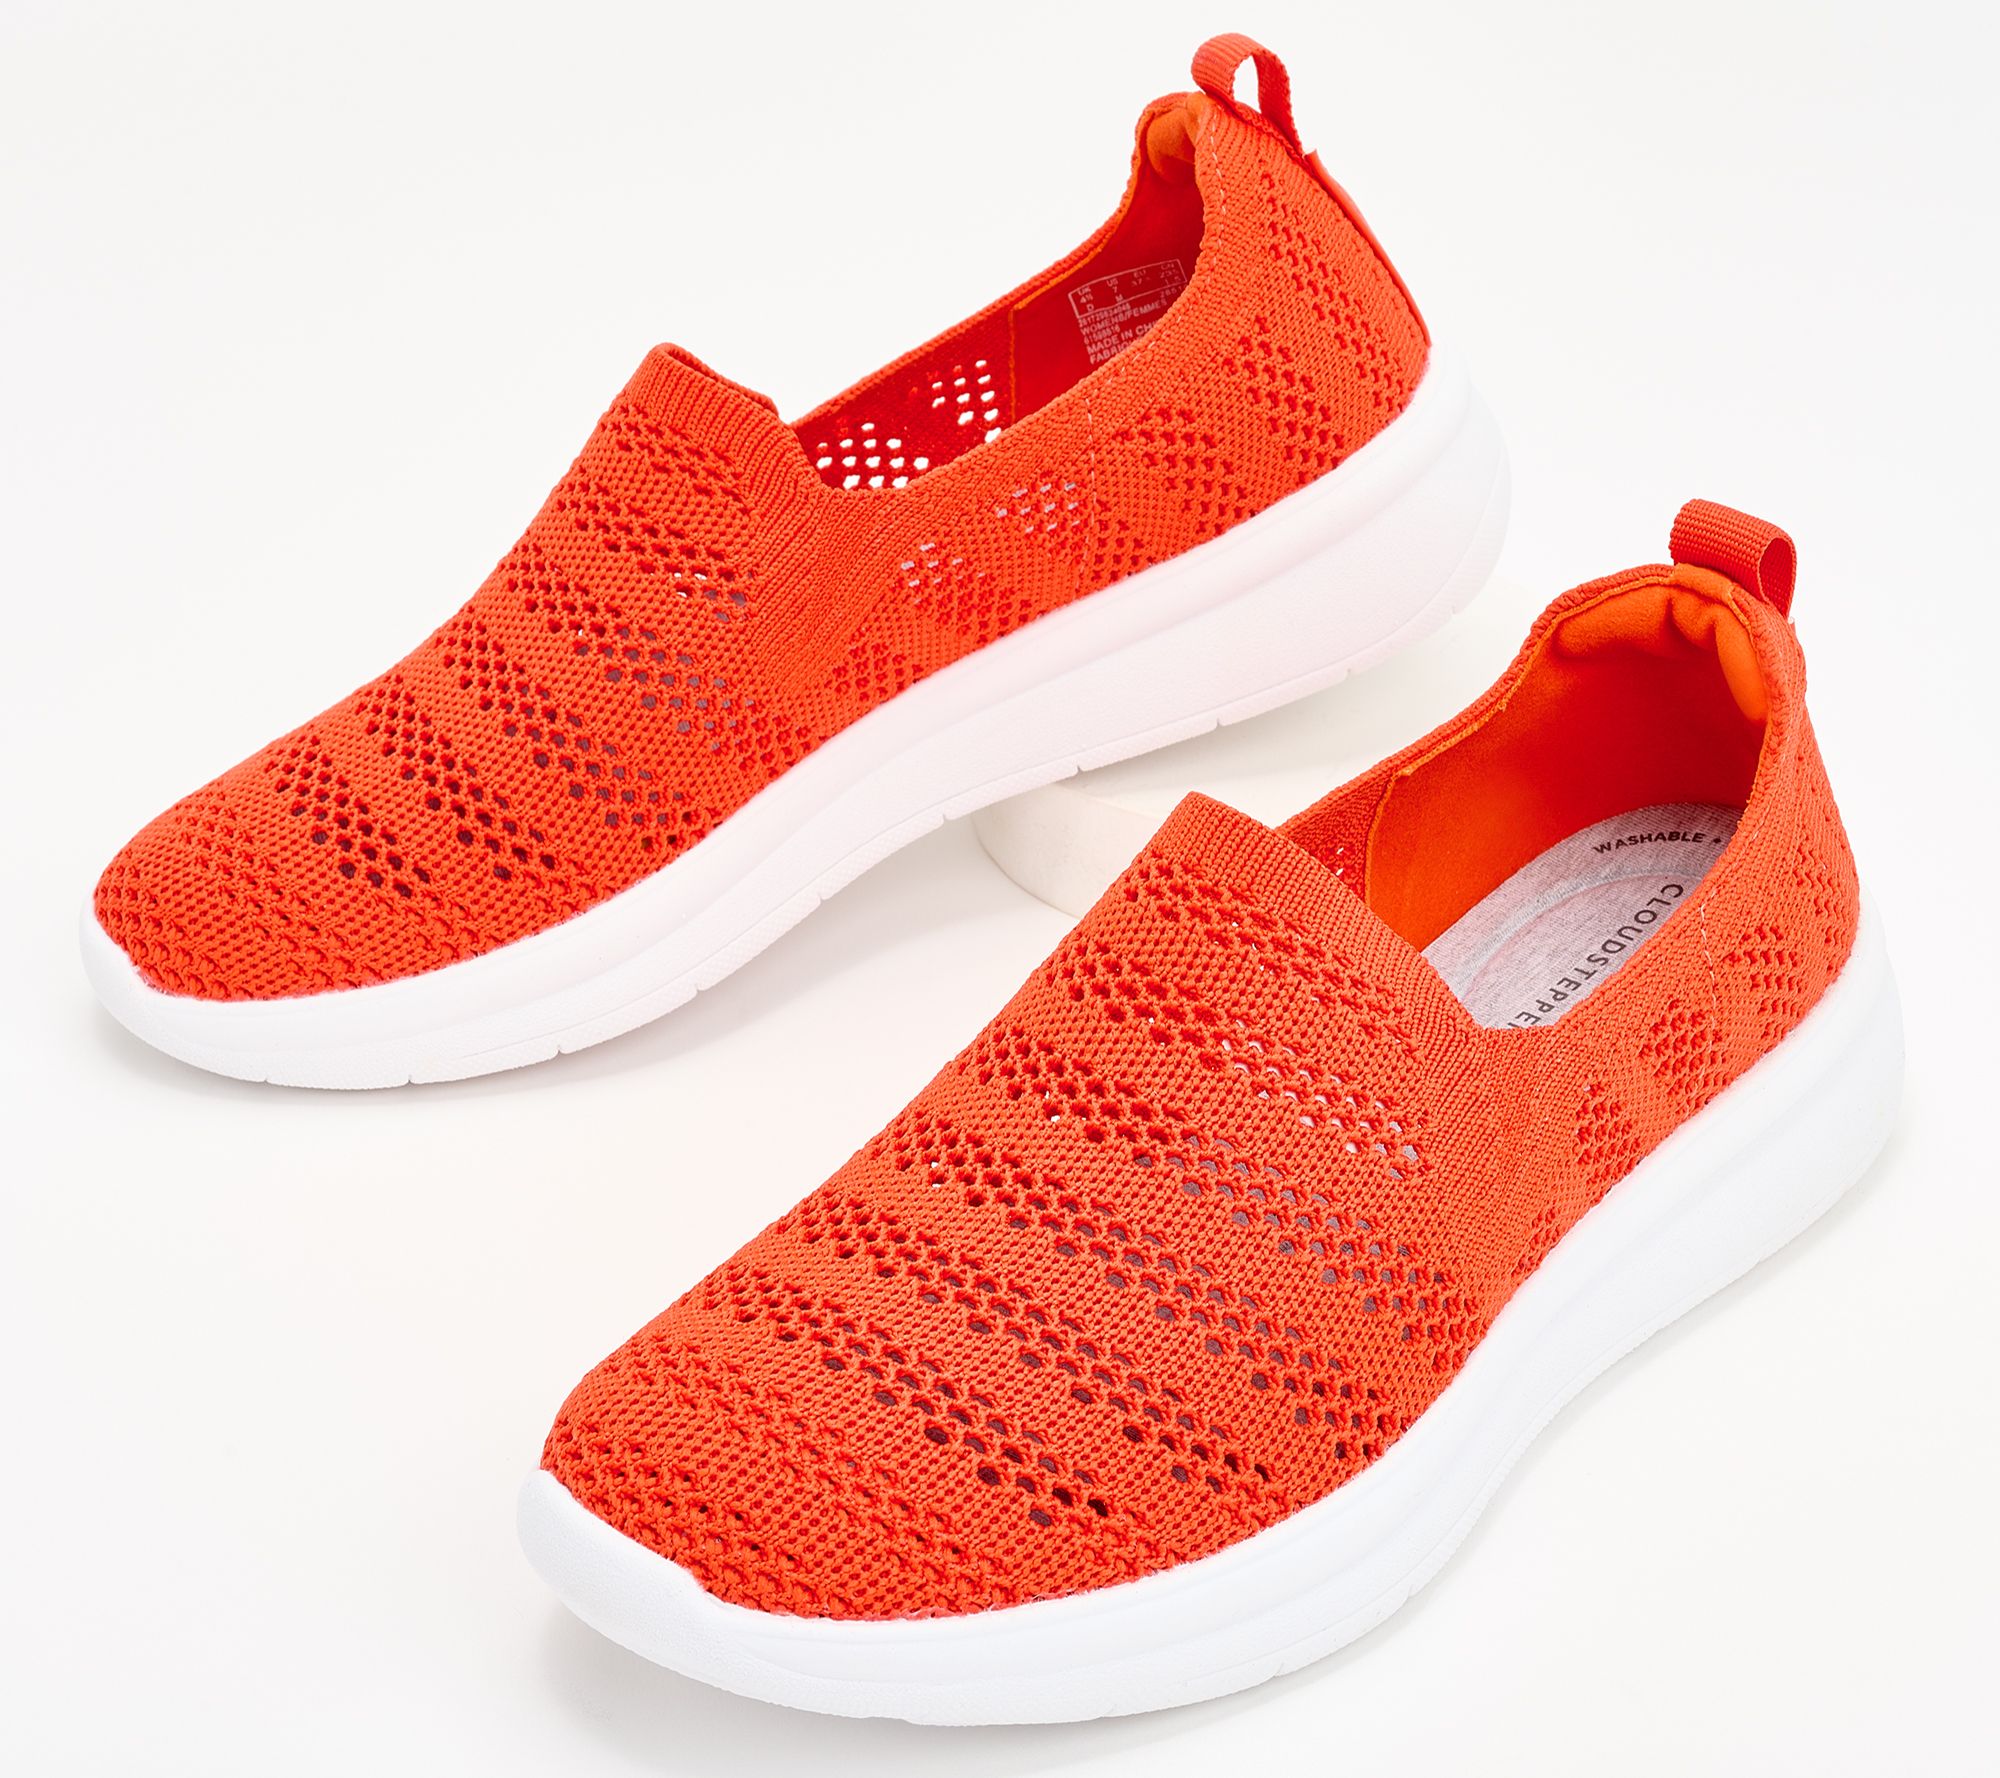 Clarks Cloudsteppers Perforated Knit Slip-Ons - Ezera Path